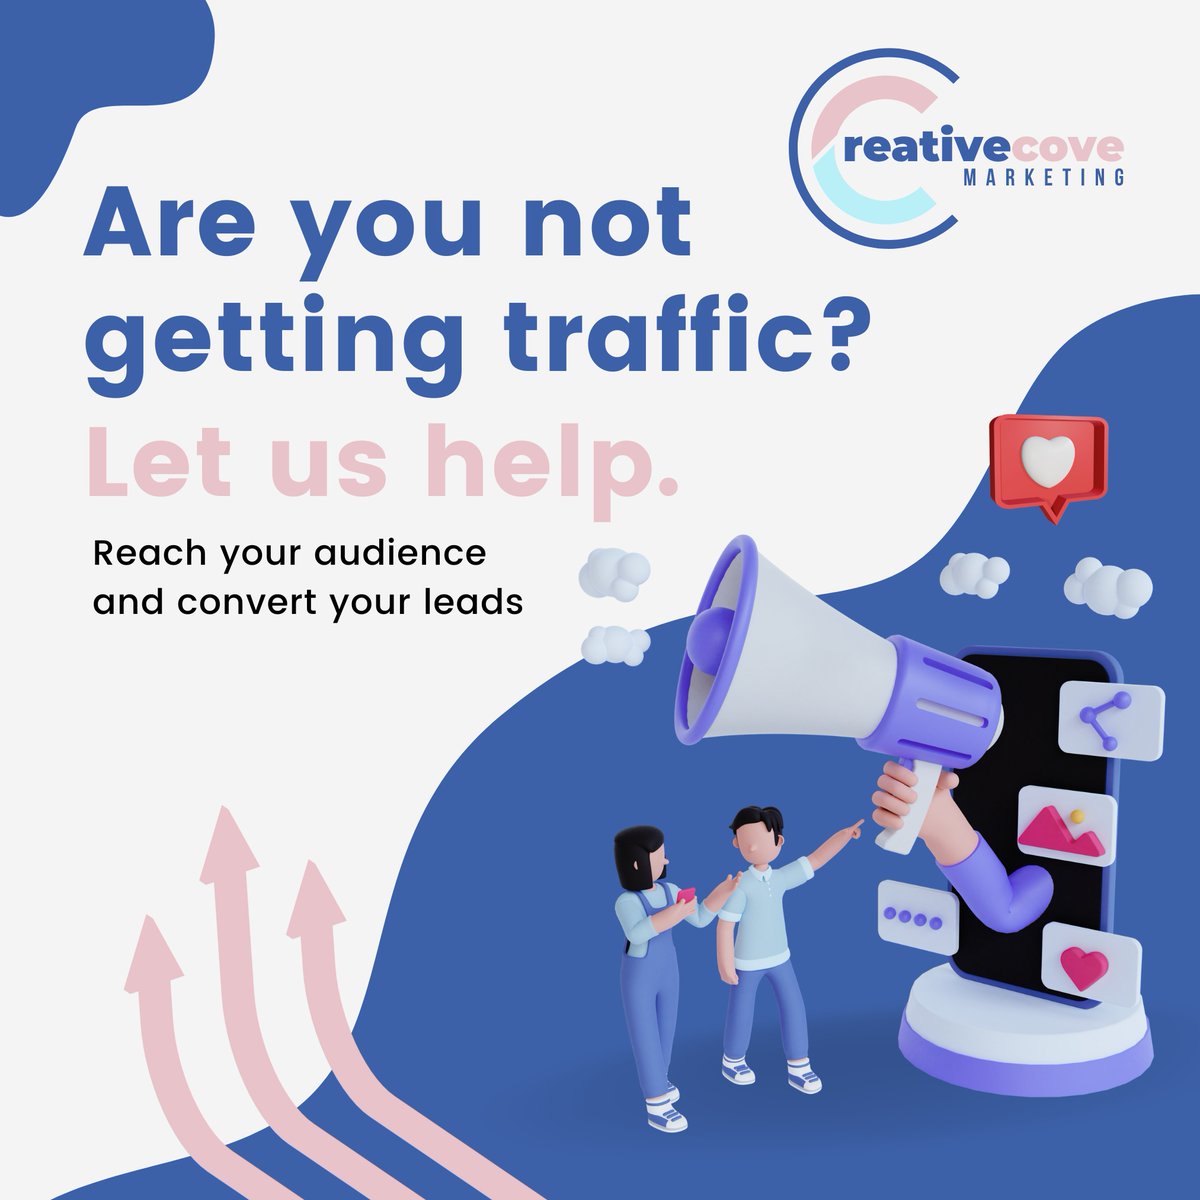 Are you not getting traffic?
Let us help.
Reach your audience and convert your leads. 

Visit us @ creativecovemarketing.com 
Call Us Now at (435) 705-4181

#BusinessCard #Webdesign #Ads #SEO #RackCard 
#GraphicDesigners #BrandingIdentity